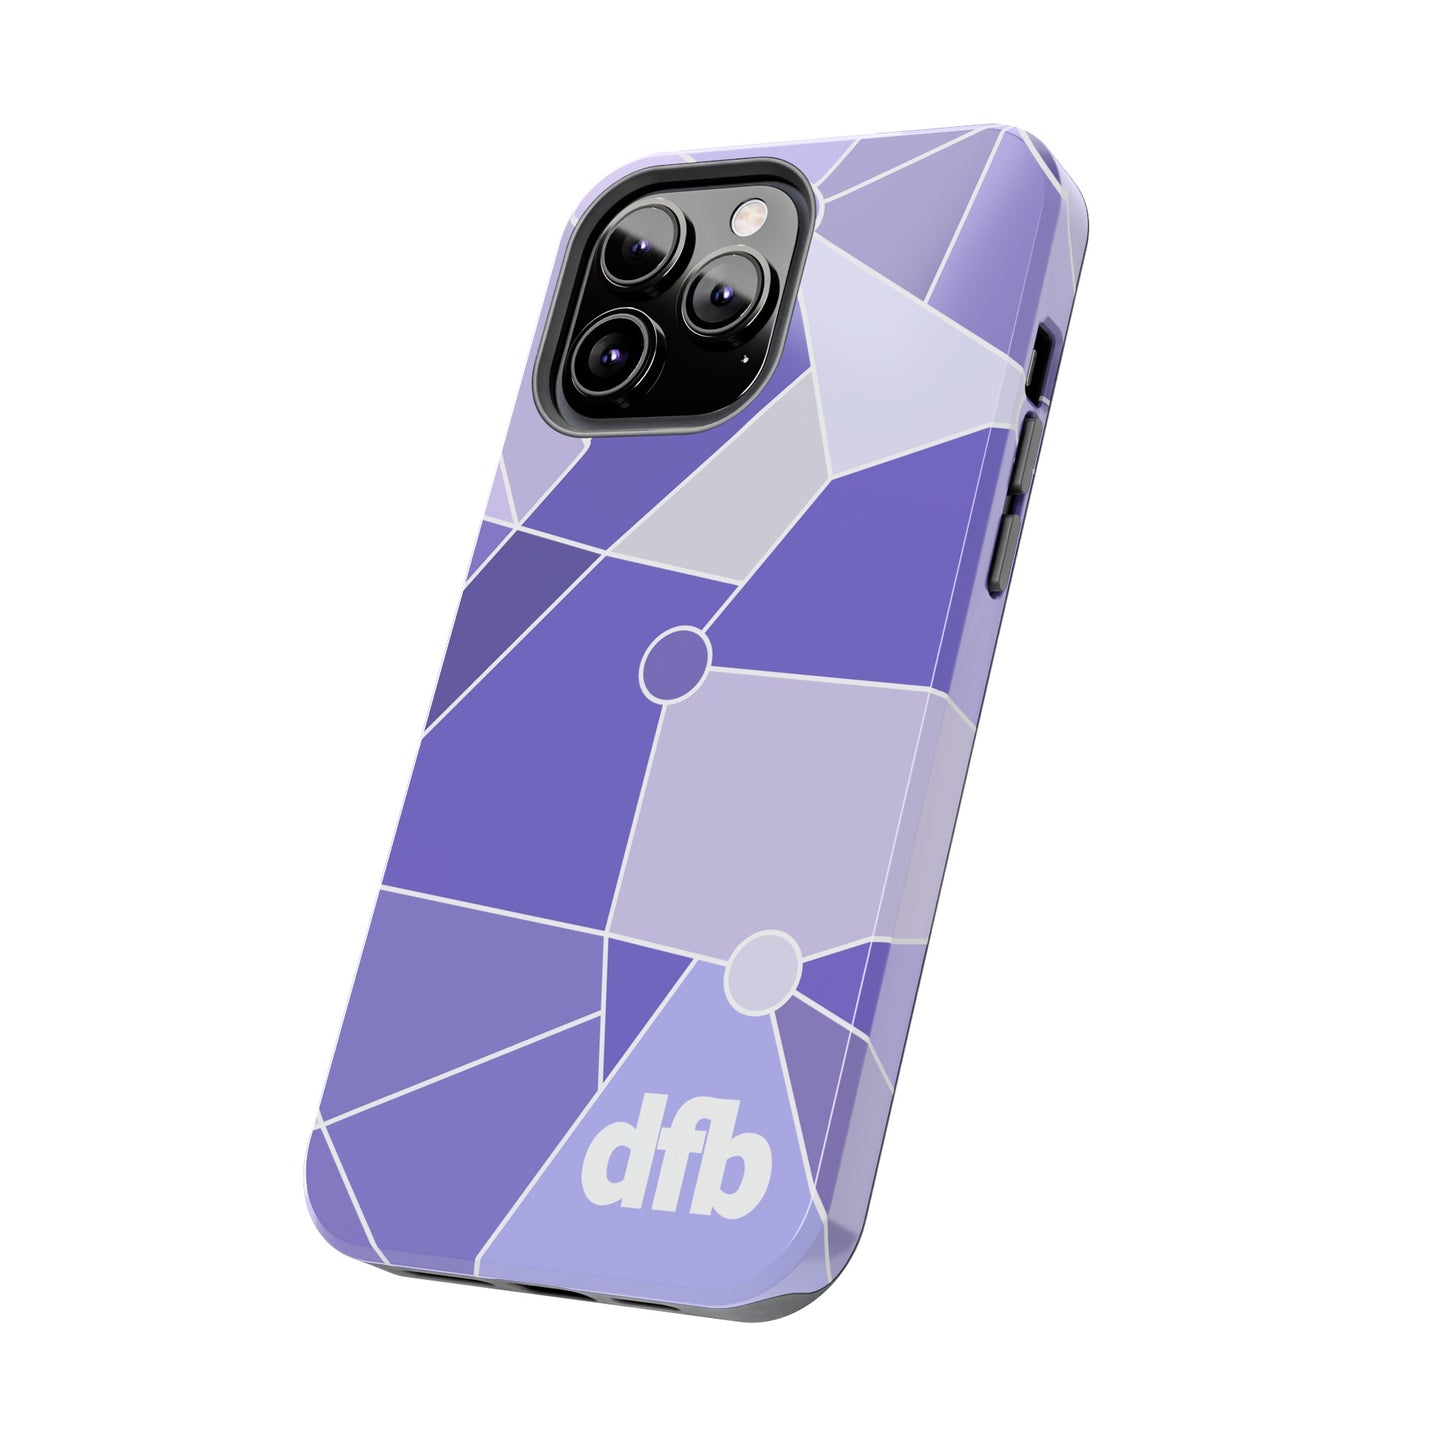 All Over "Purple Wall" Tomorrowland Epcot - Apple Phone Case